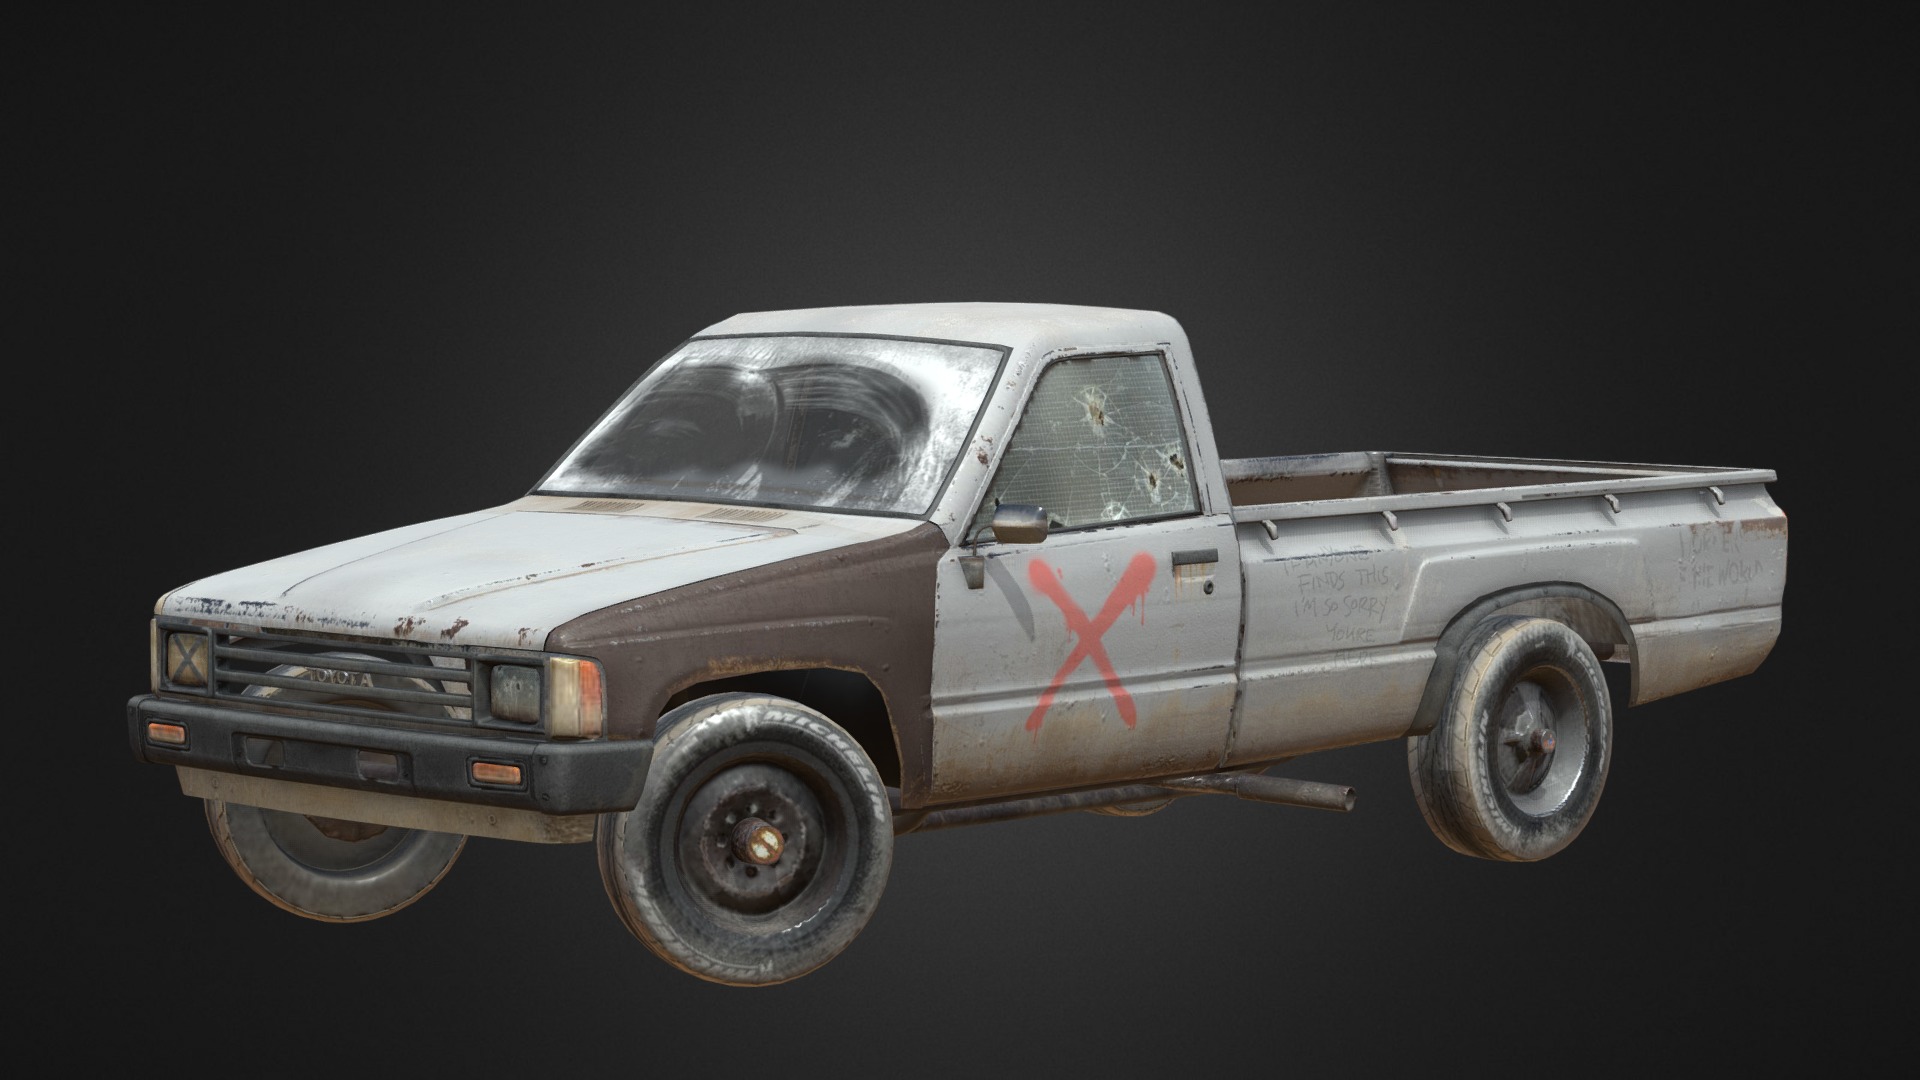 3D model Toyota Hilux 1983 - This is a 3D model of the Toyota Hilux 1983. The 3D model is about a toy car on a black background.